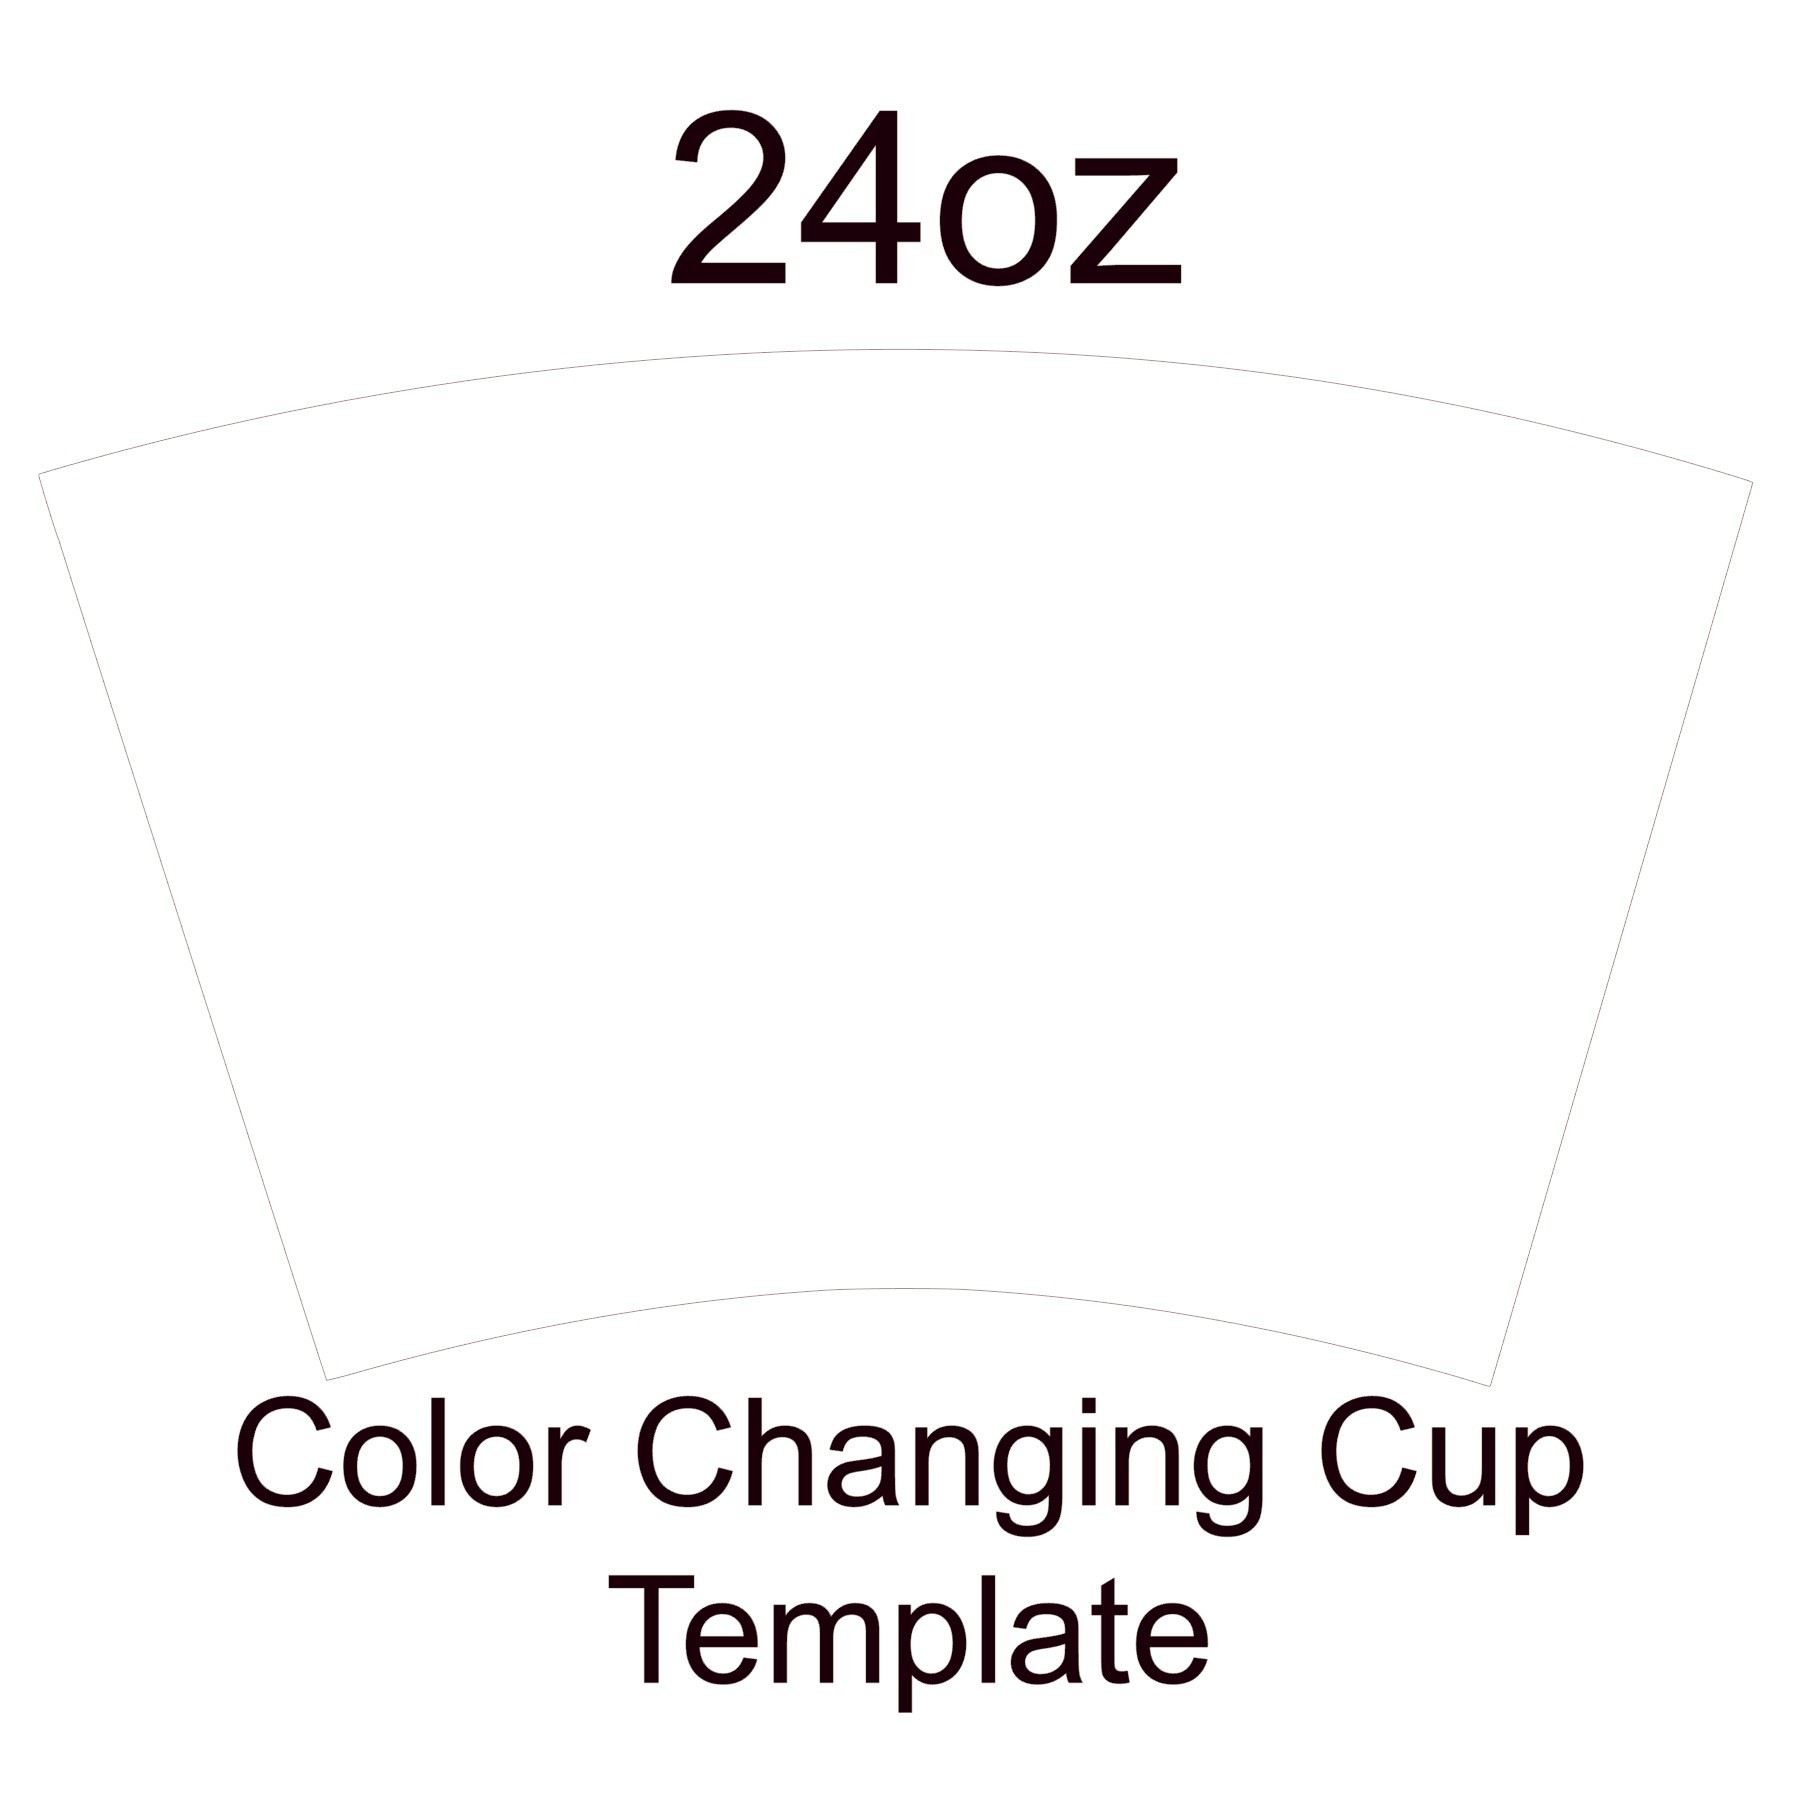 Color Changing Cup Template